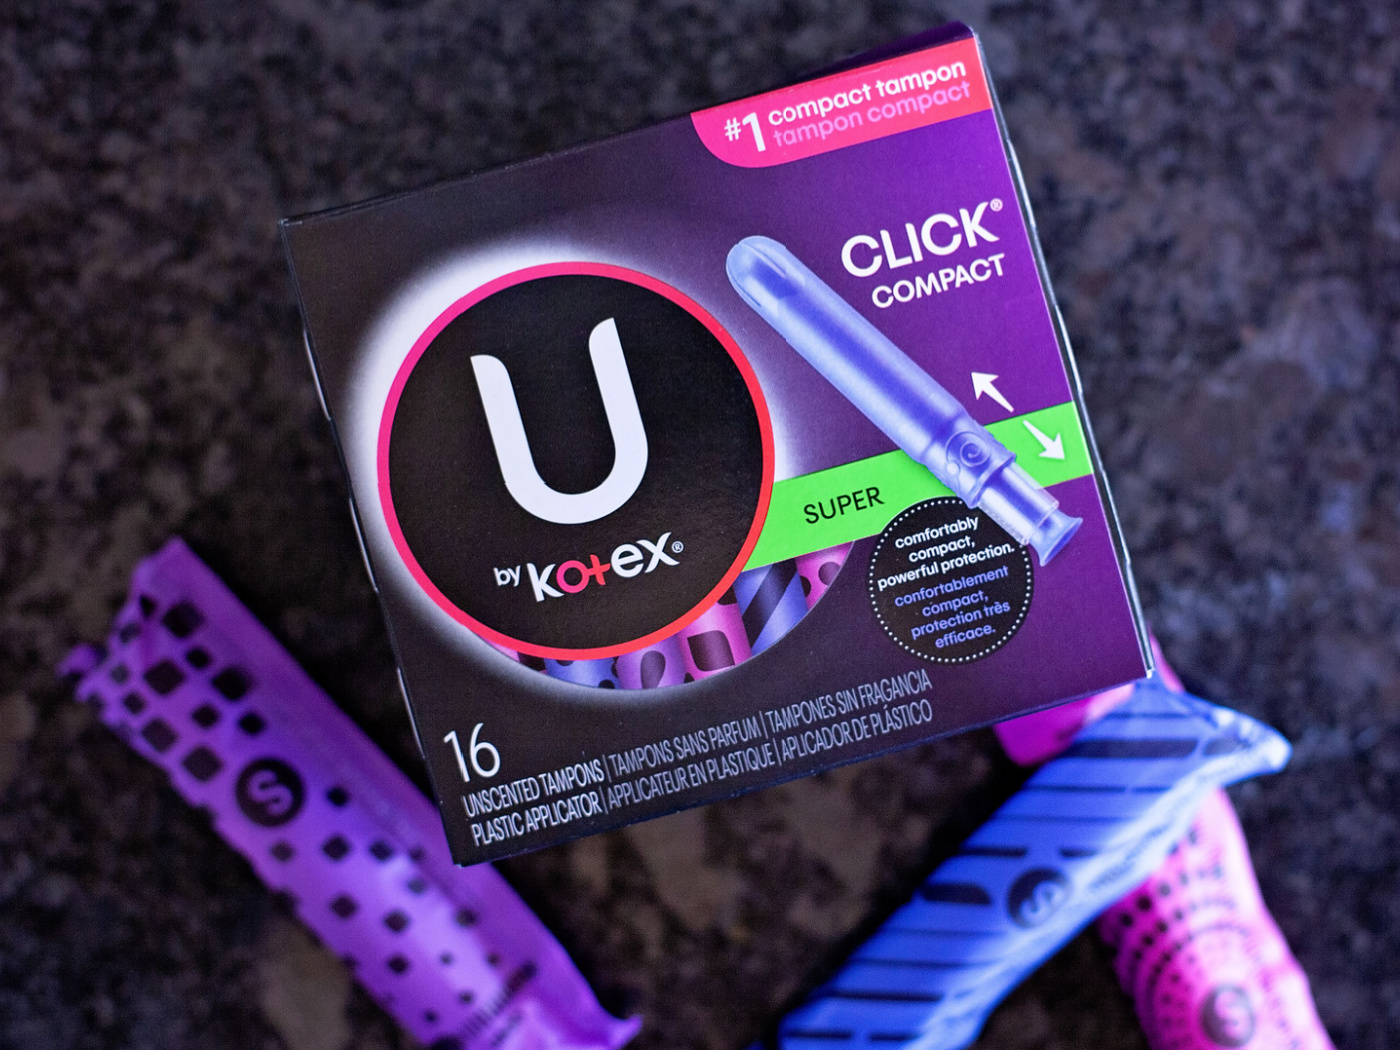 Grab U By Kotex Pads And Tampons For As Low As $2.49 At Kroger